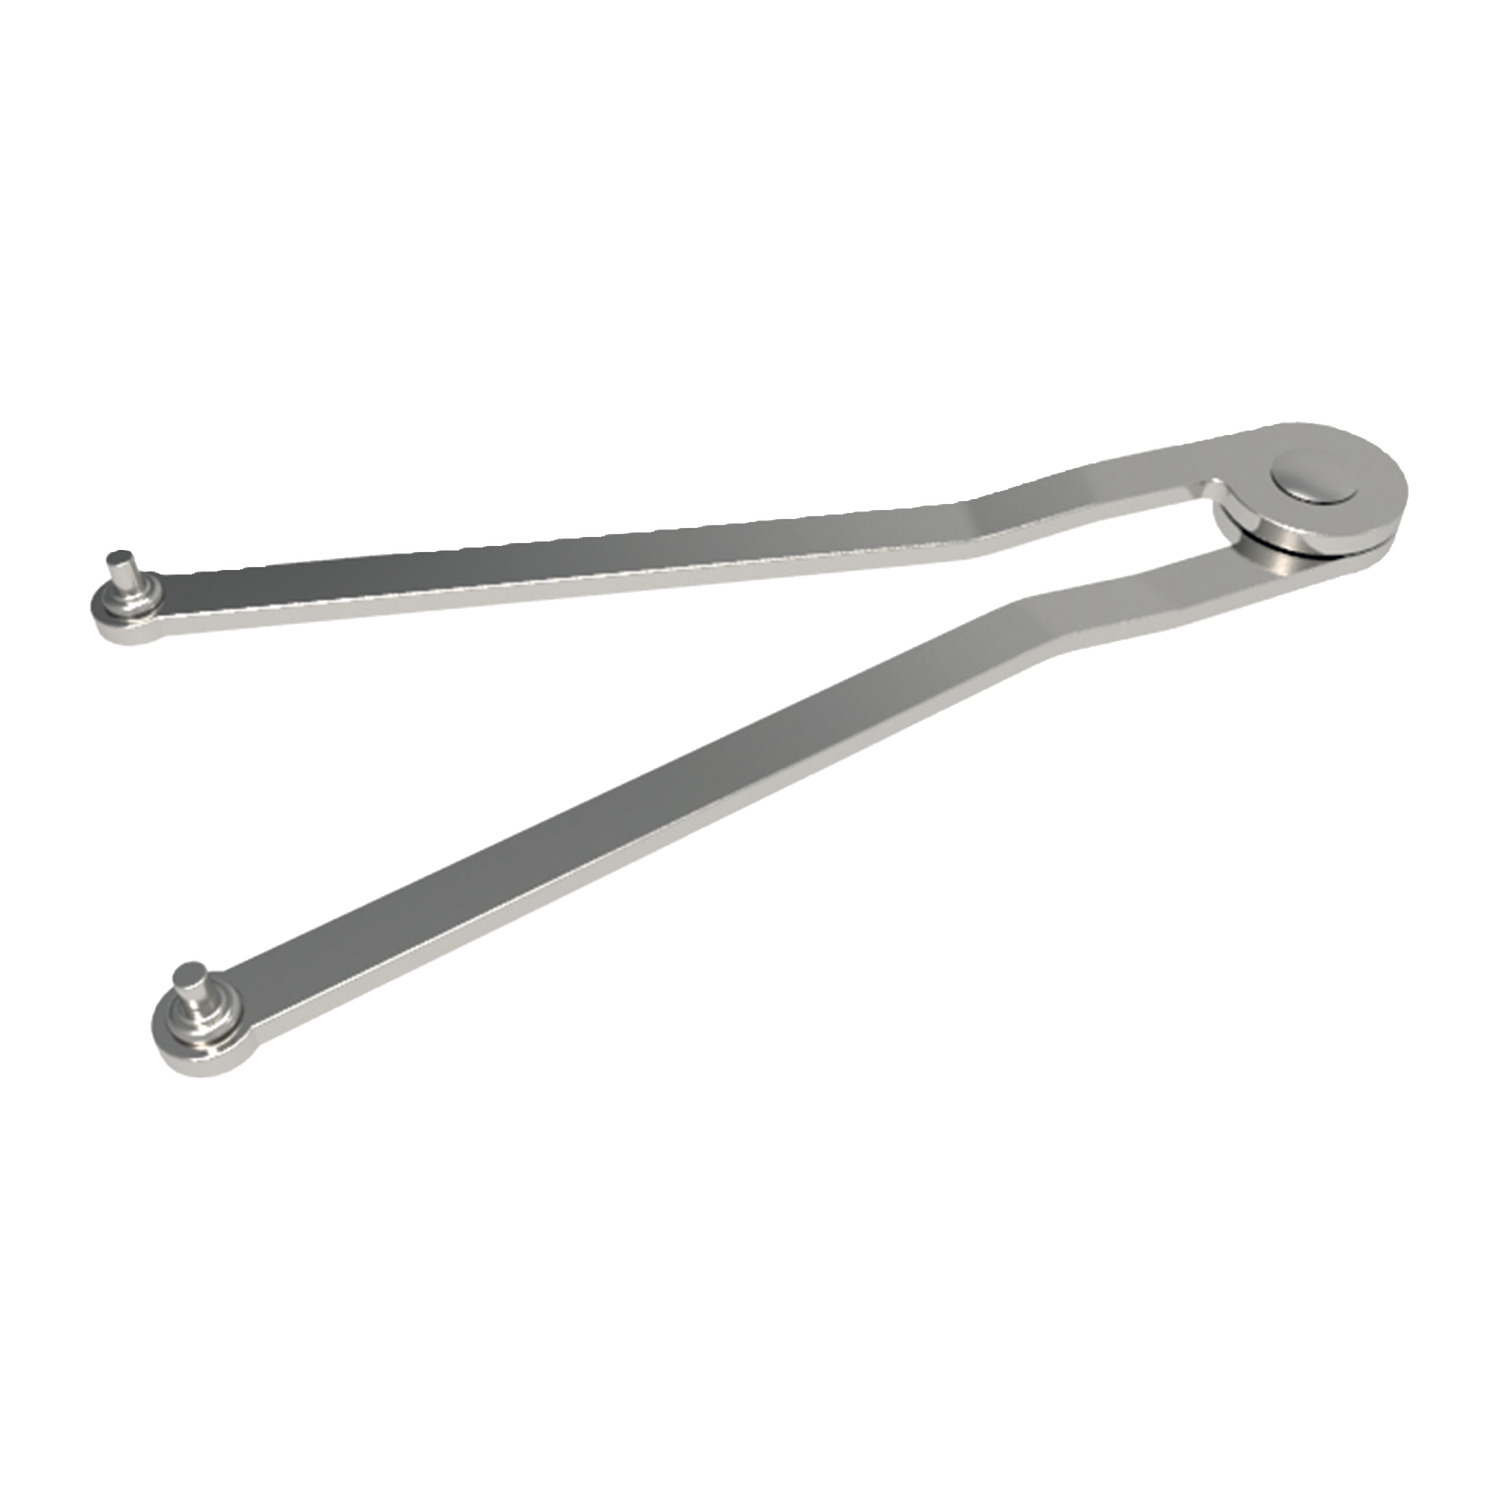 Product 94000.2, Adjustable Pin Face Spanners stainless steel - with welded pins / 